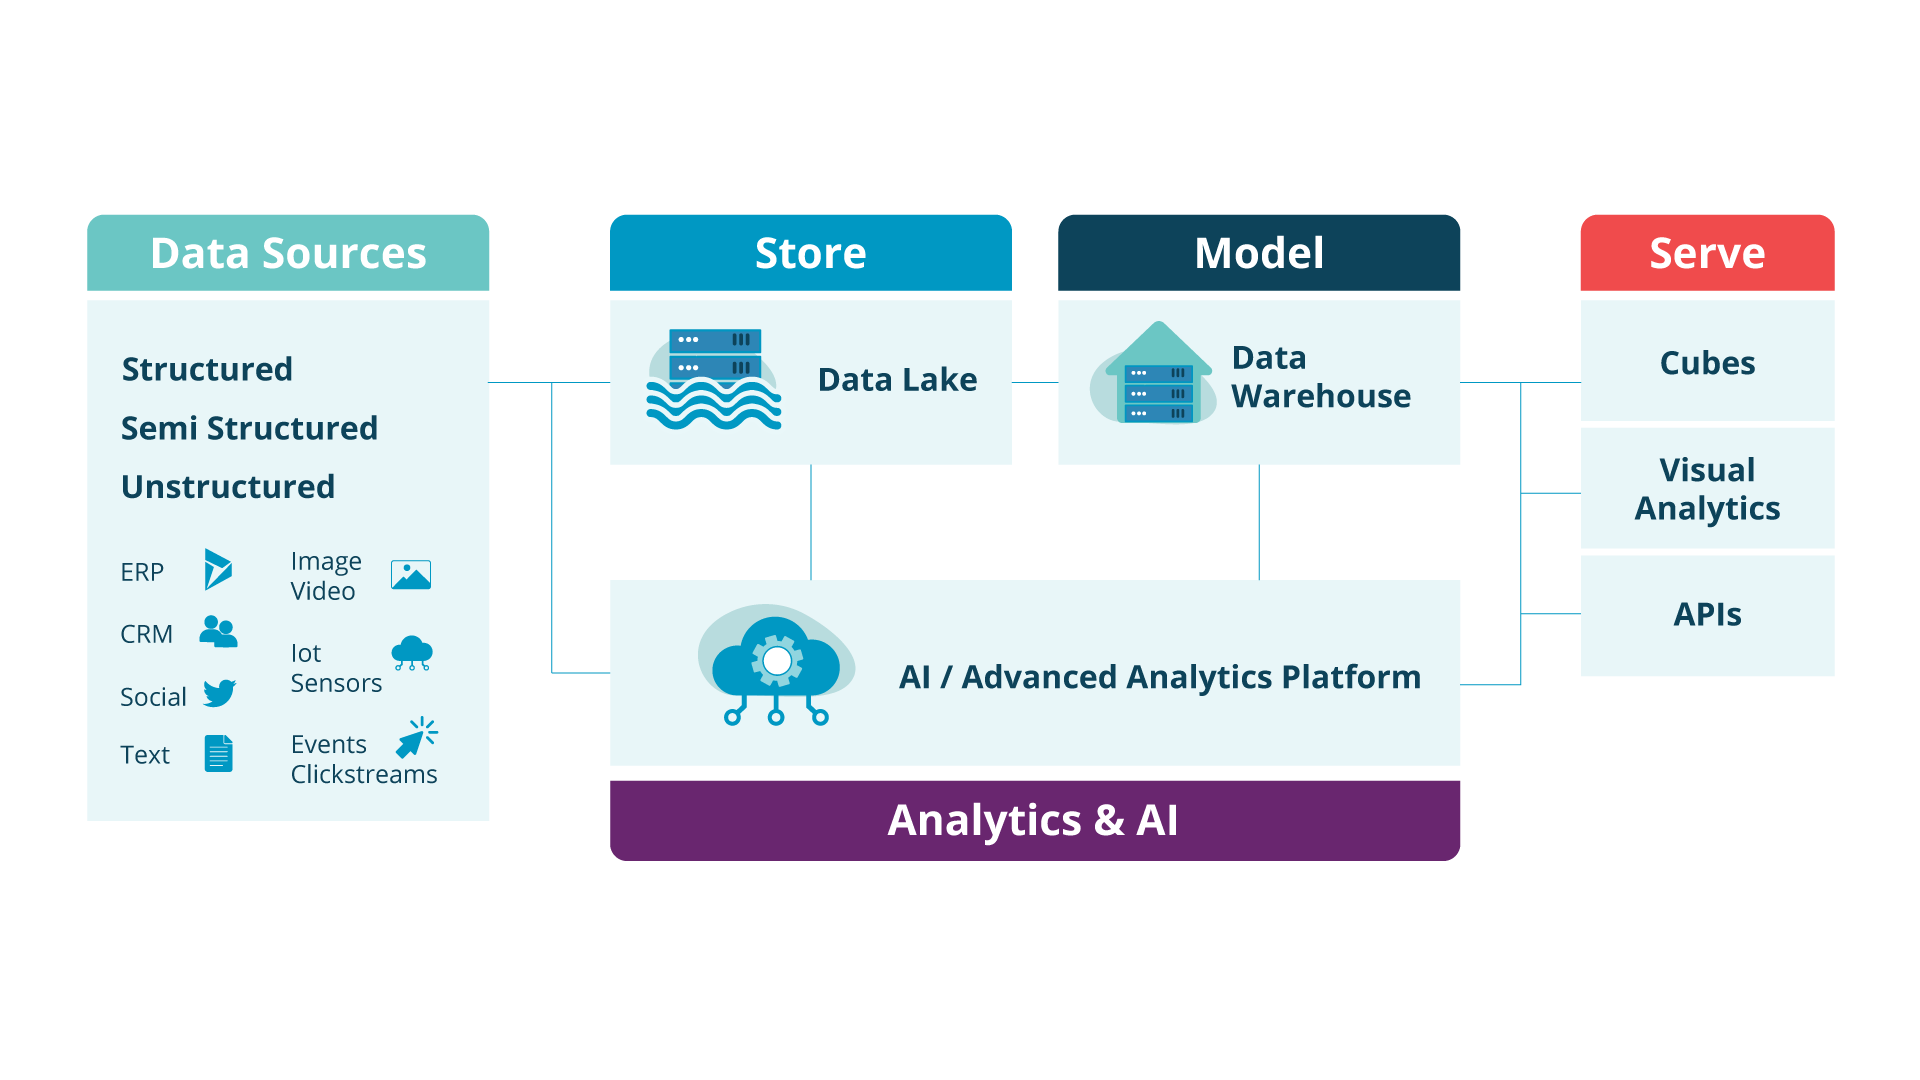 Cloud Data Platform with Cegeka Reference Architecture